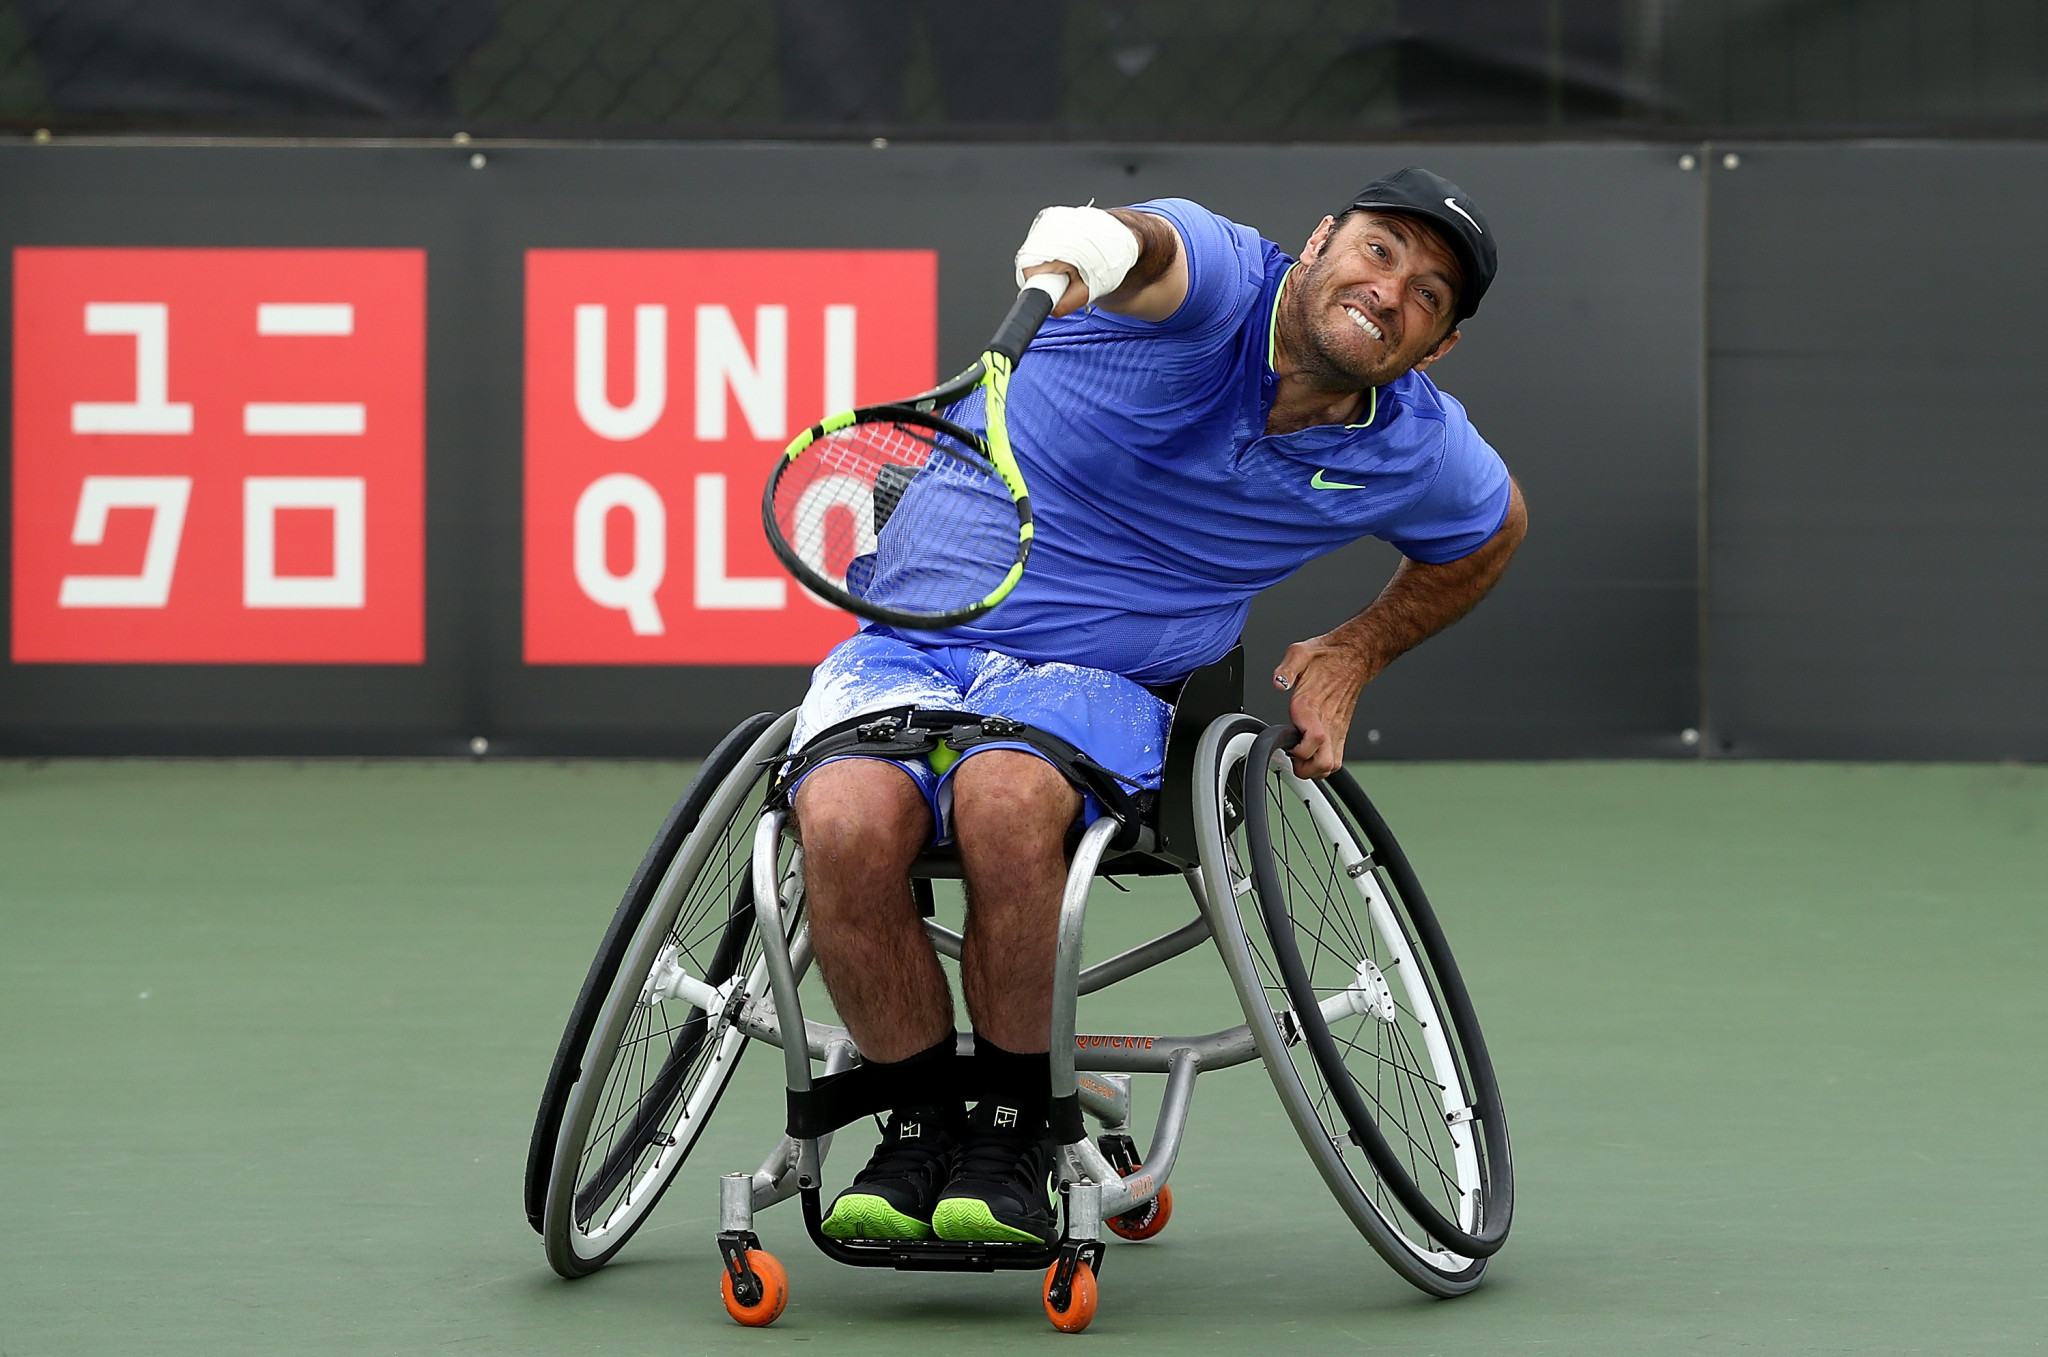 David Wagner, Quad wheelchair world number one and Paralympic gold medallist, is excited that the ITF Quad division is being given the opportunity to compete in an exhibition event at Wimbledon next summer ©Getty Images